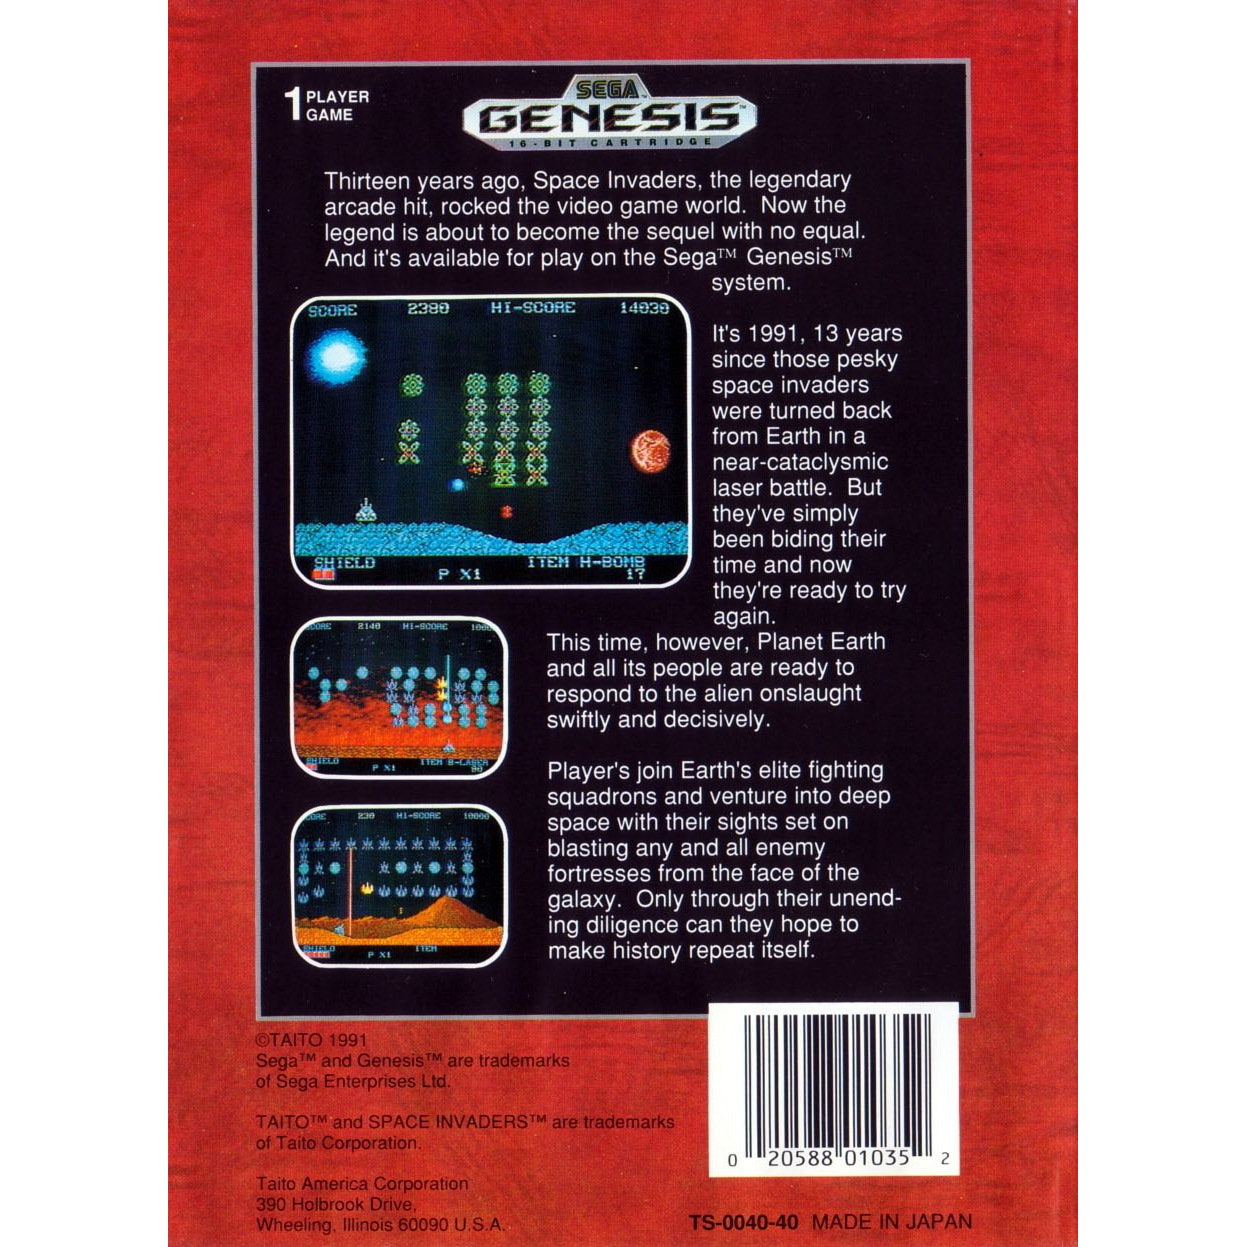 Space Invaders '91 - Sega Genesis Game Complete - YourGamingShop.com - Buy, Sell, Trade Video Games Online. 120 Day Warranty. Satisfaction Guaranteed.